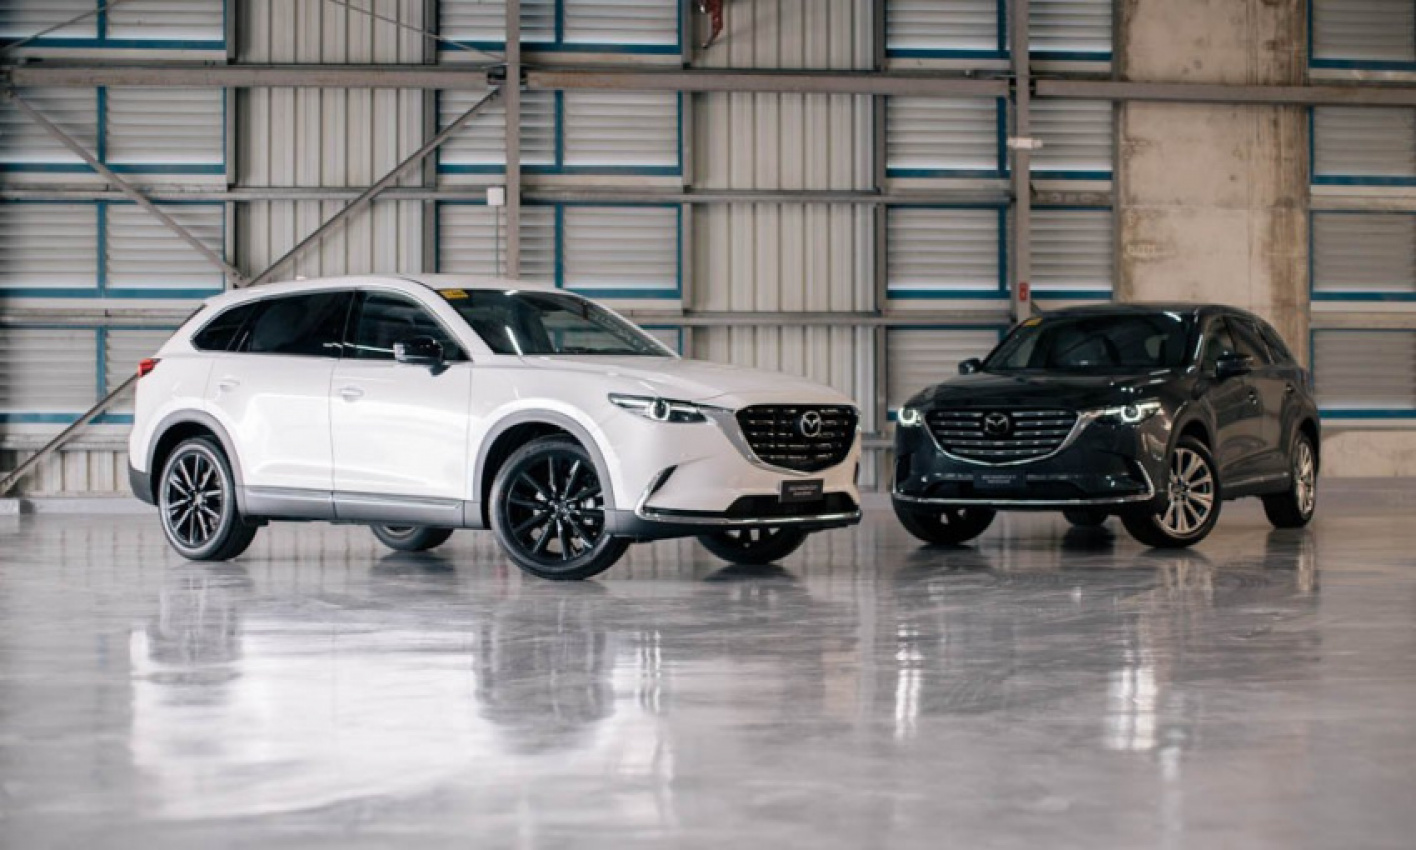 autos, cars, mazda, reviews, mazda cx-9, here’s a peek at the 2022 mazda cx-9 black edition and exclusive